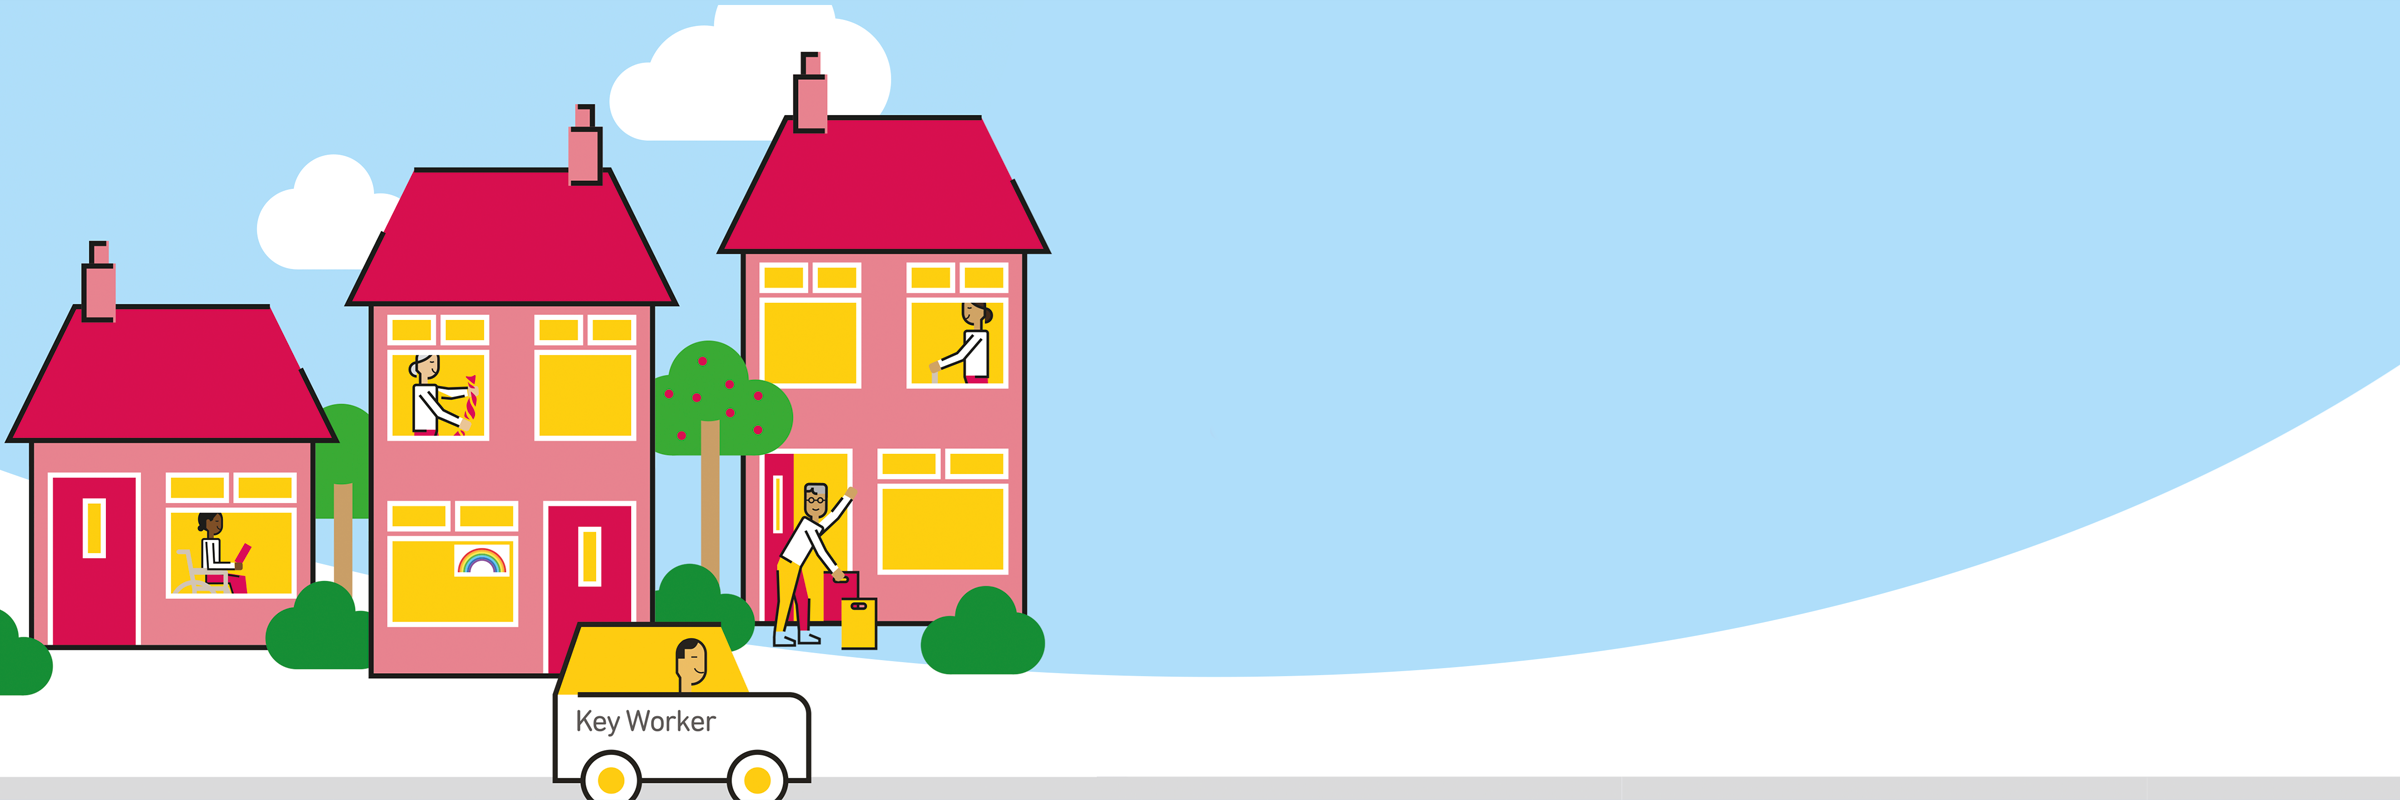 Graphic of people in houses and a car with a sign on the side which says 'Key Worker'